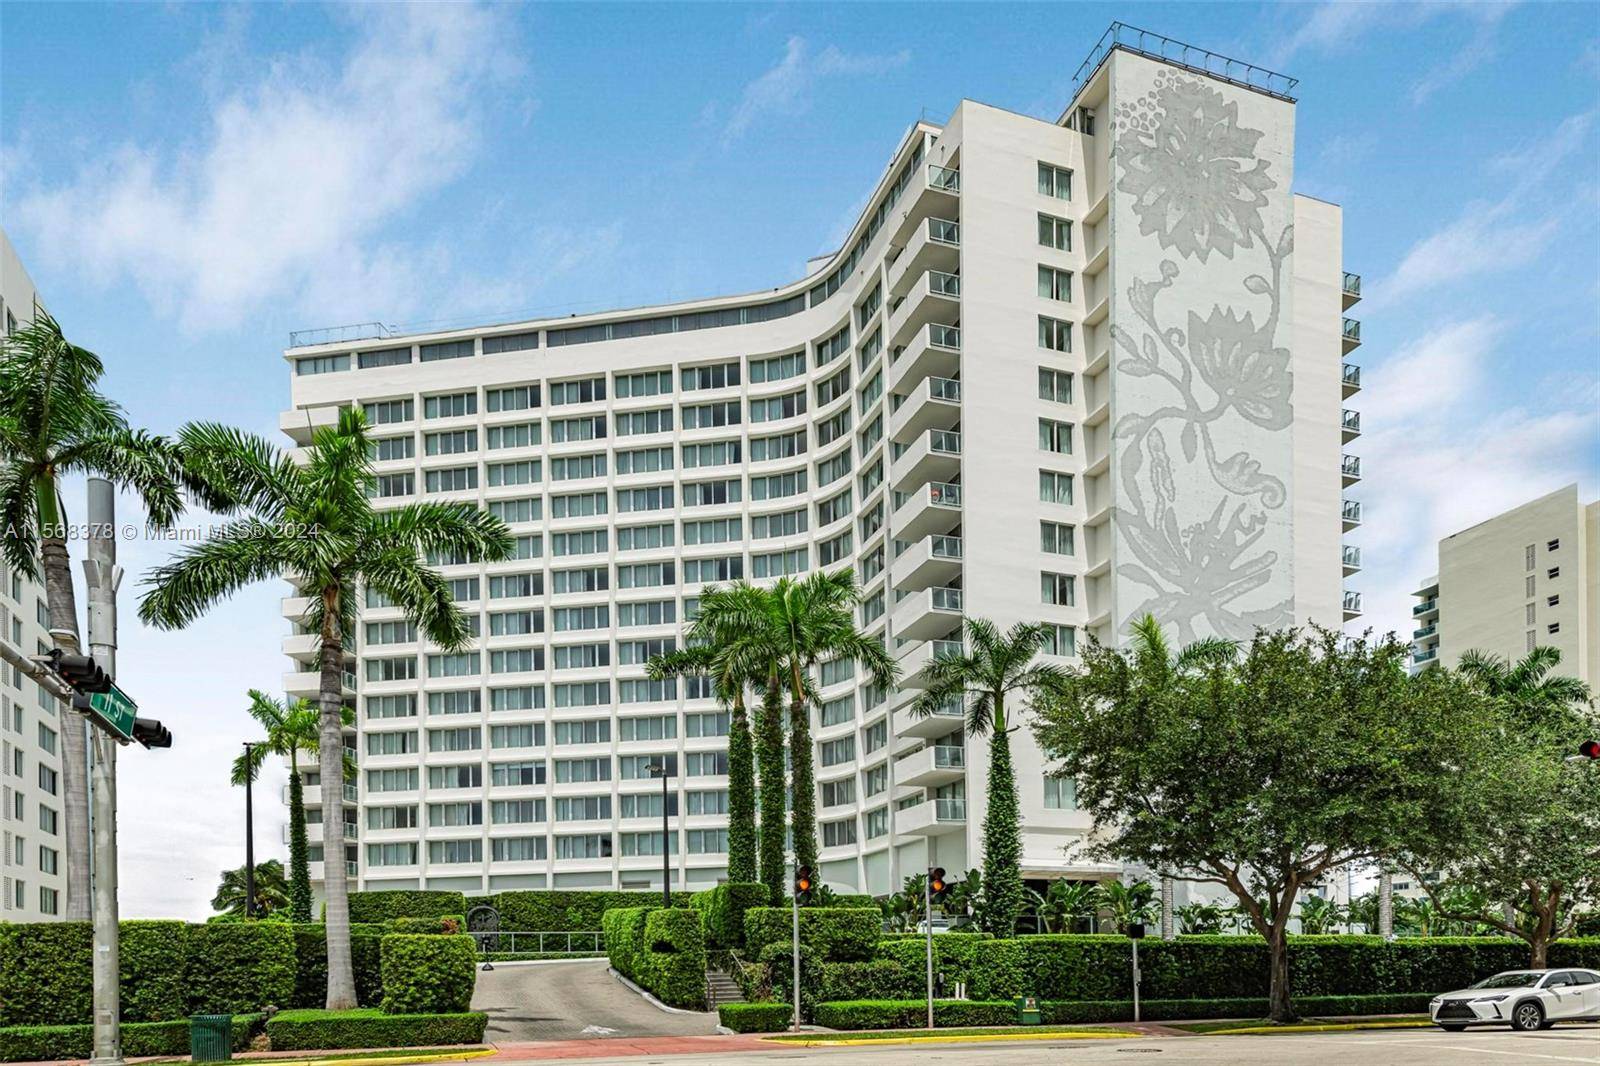 Remarkable 1 Bedroom 1 Bathroom Fully Furnished Condo Located in the Prestigious Mondrian South Beach.